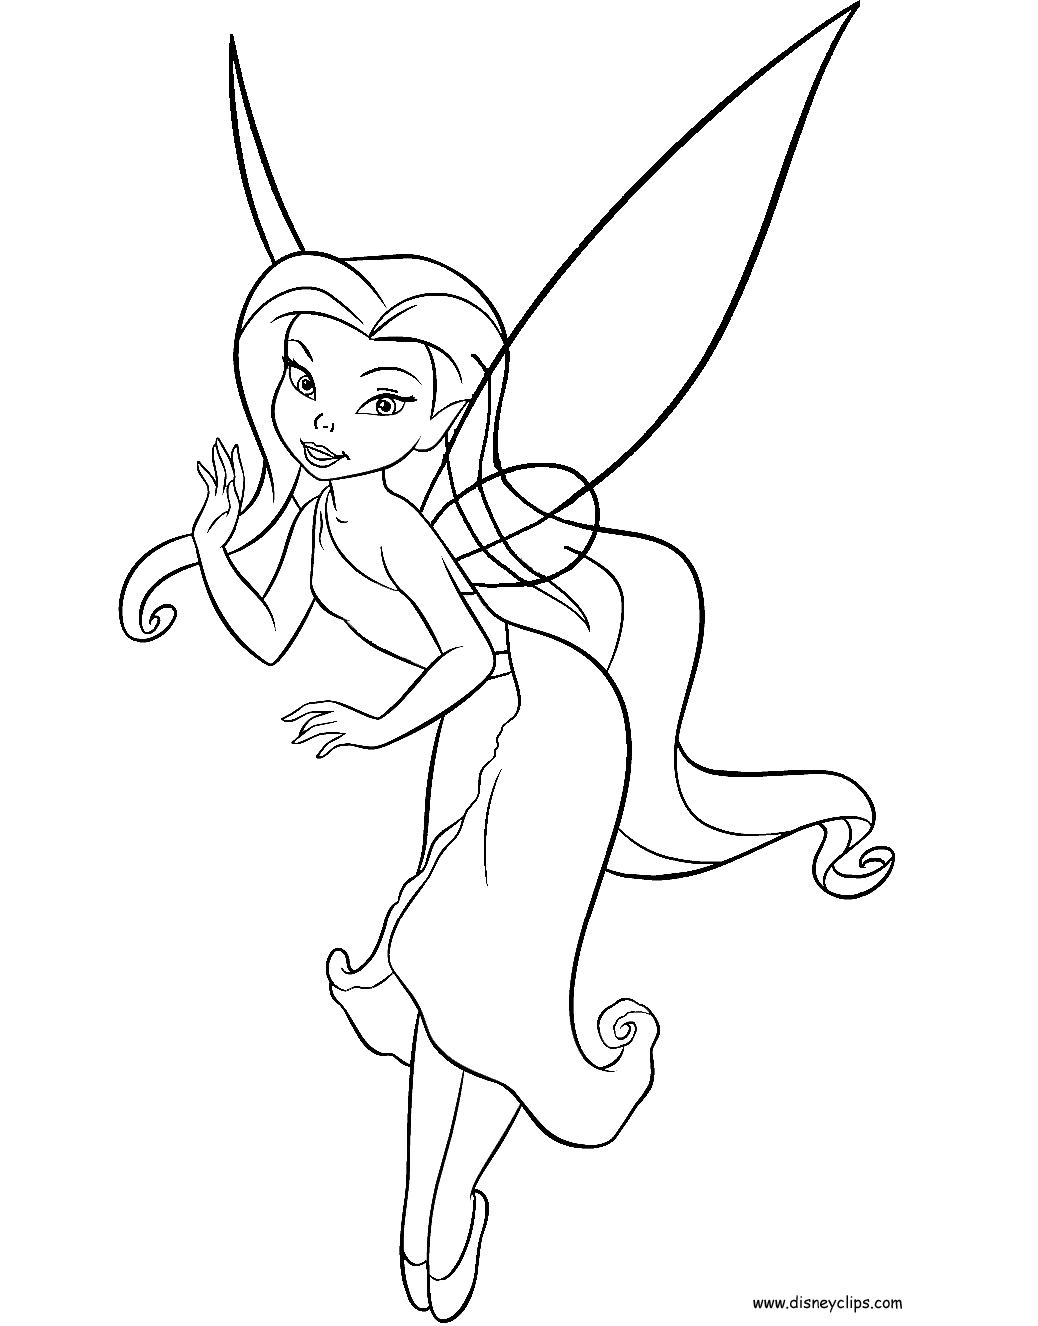 disney fairy pictures to color fawn beautiful disney fairies coloring page download to color fairy pictures disney 